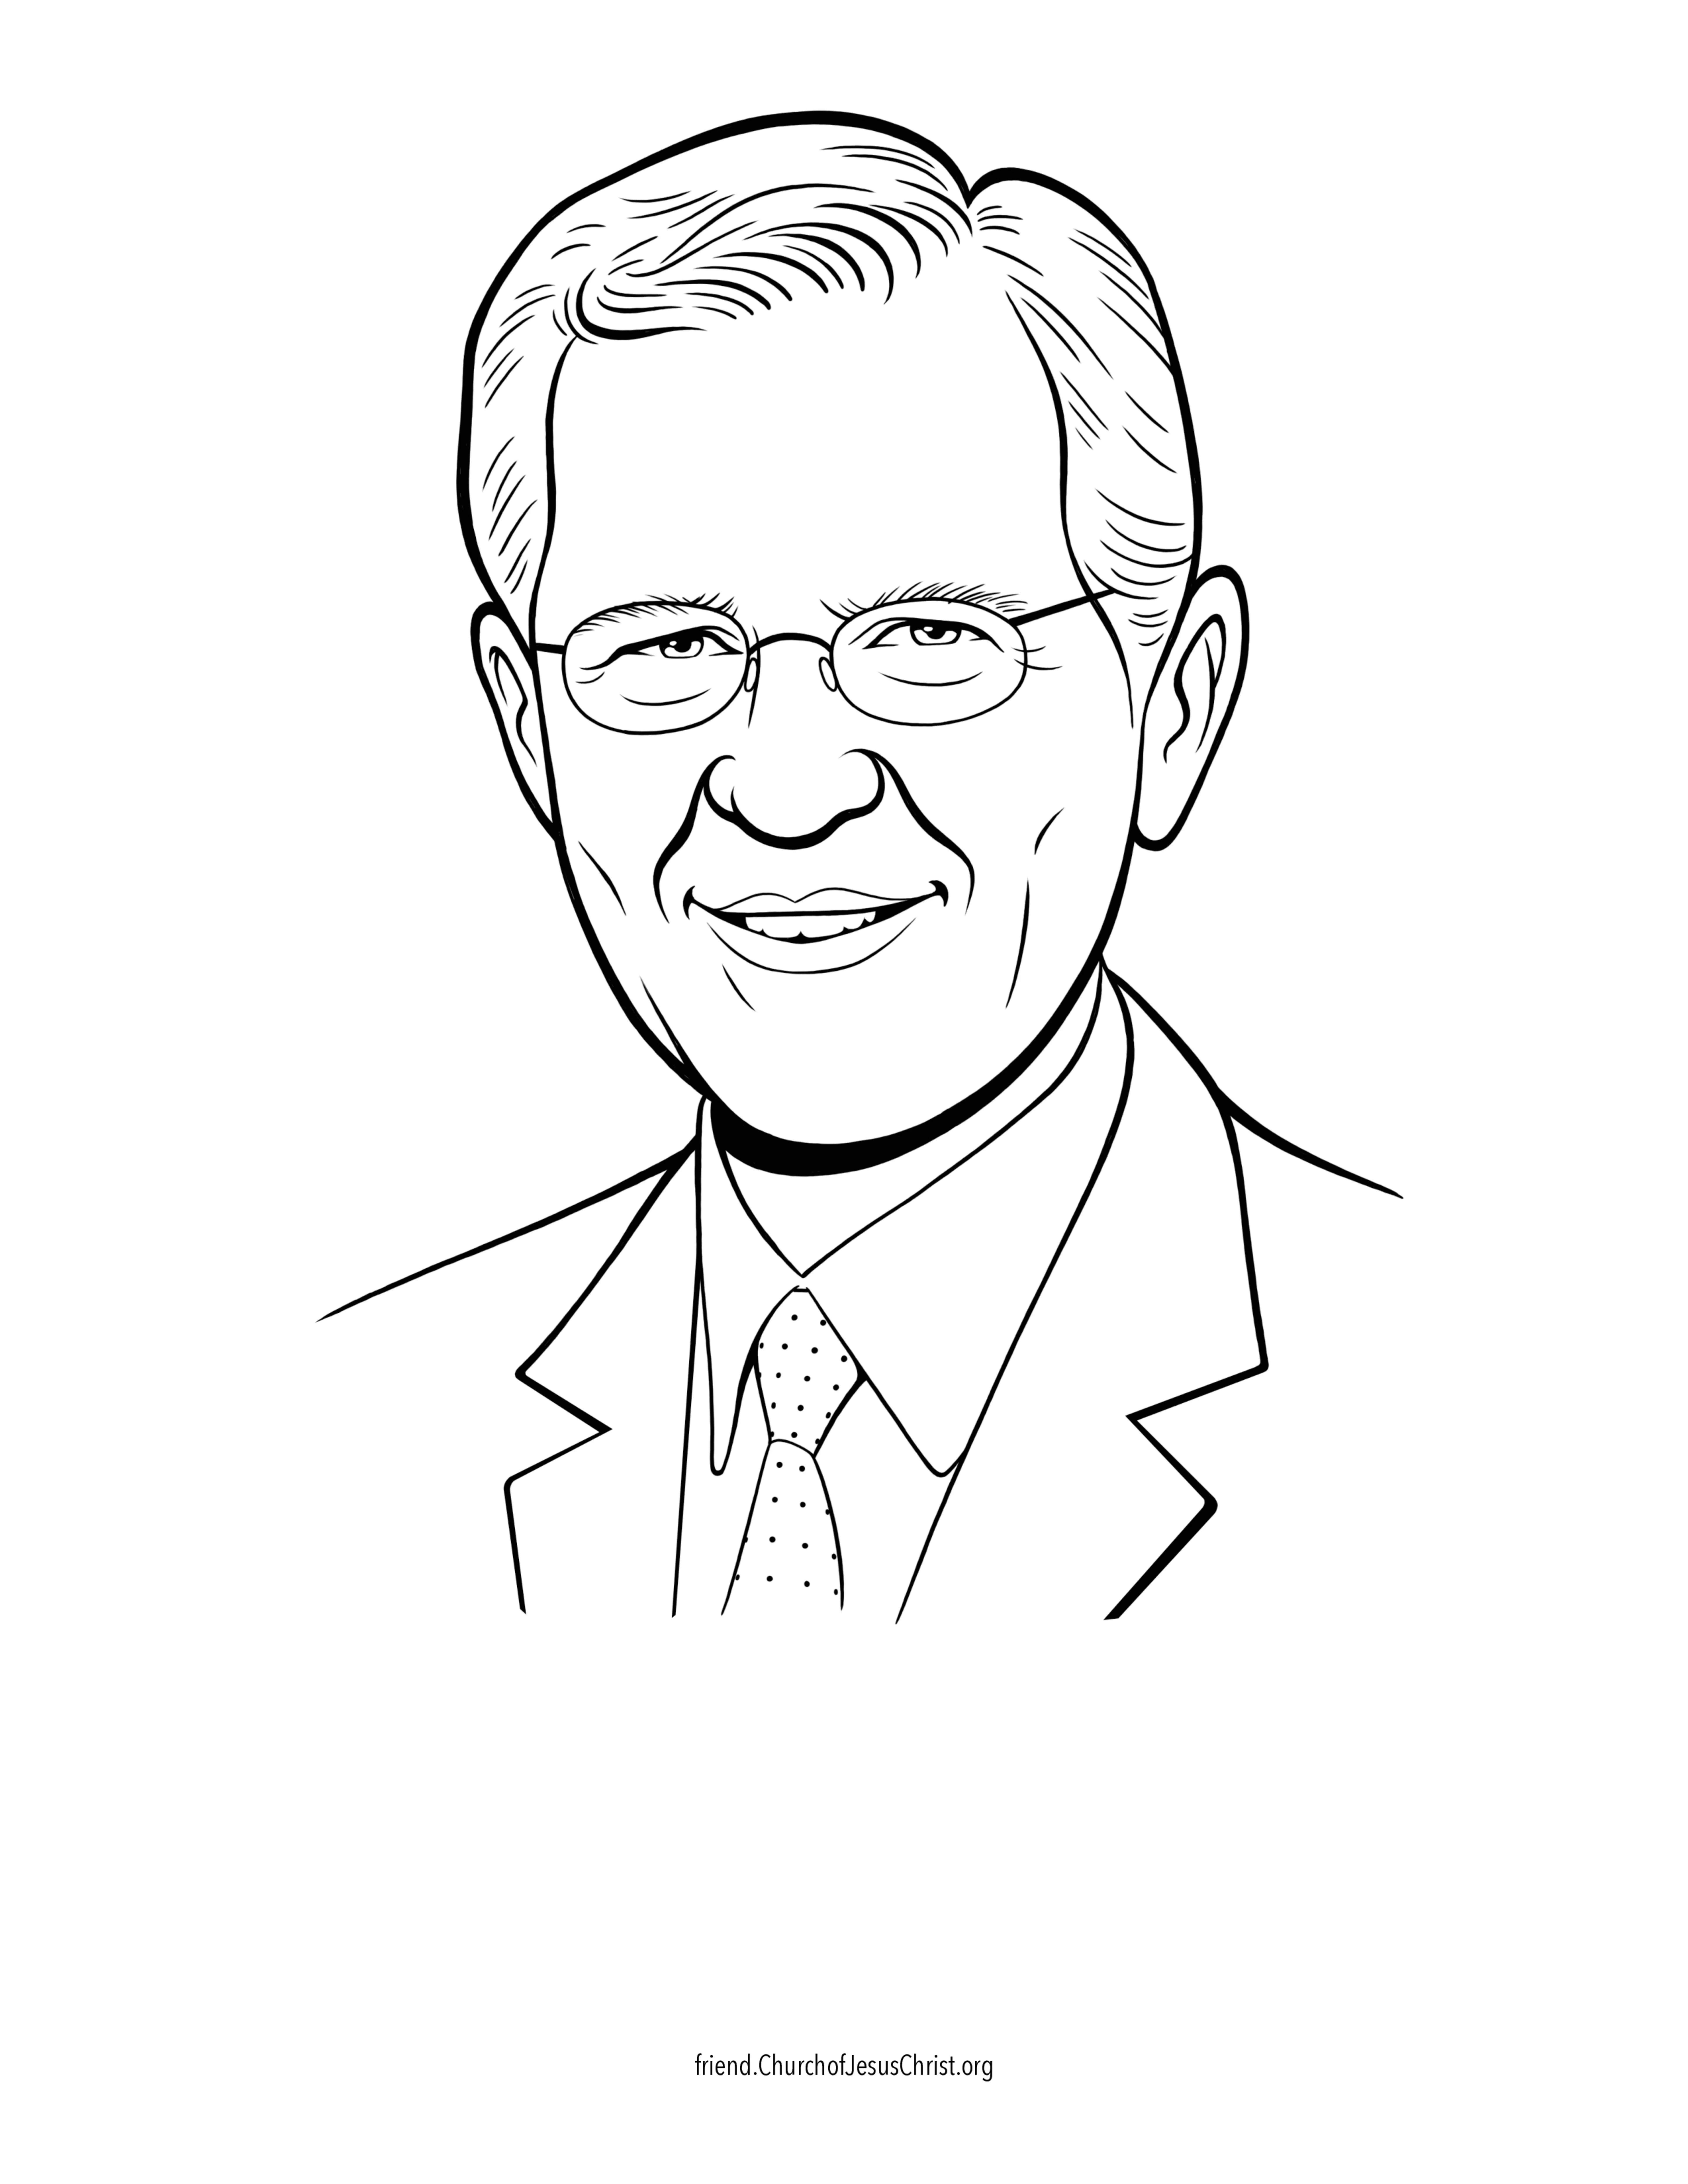 A coloring page of the official portrait of D. Todd Christofferson.